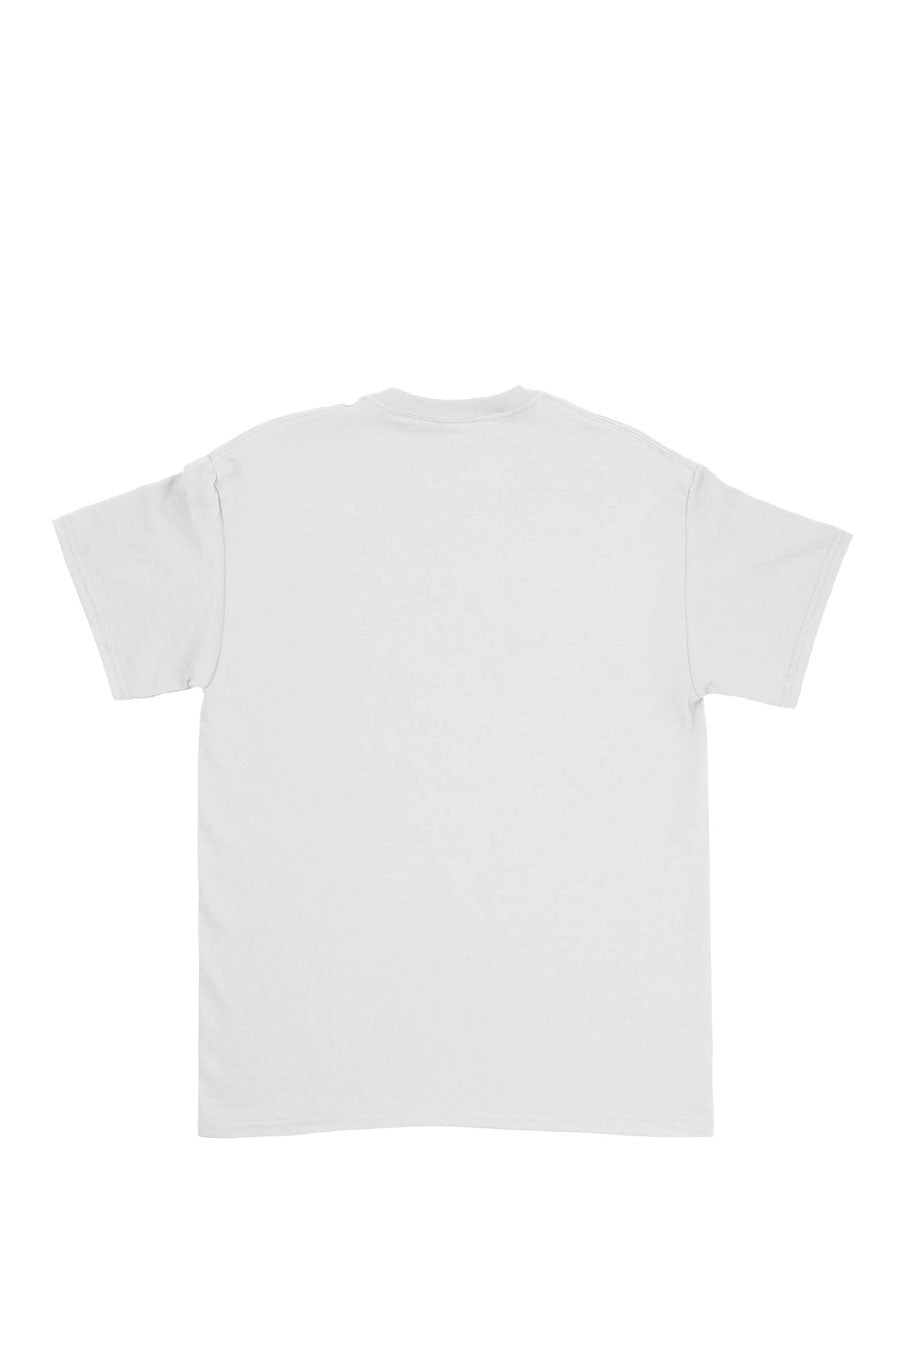 UXE MENTALE SOBREDOSIS MOVIE #2 STANDARD FIT TEE WHITE